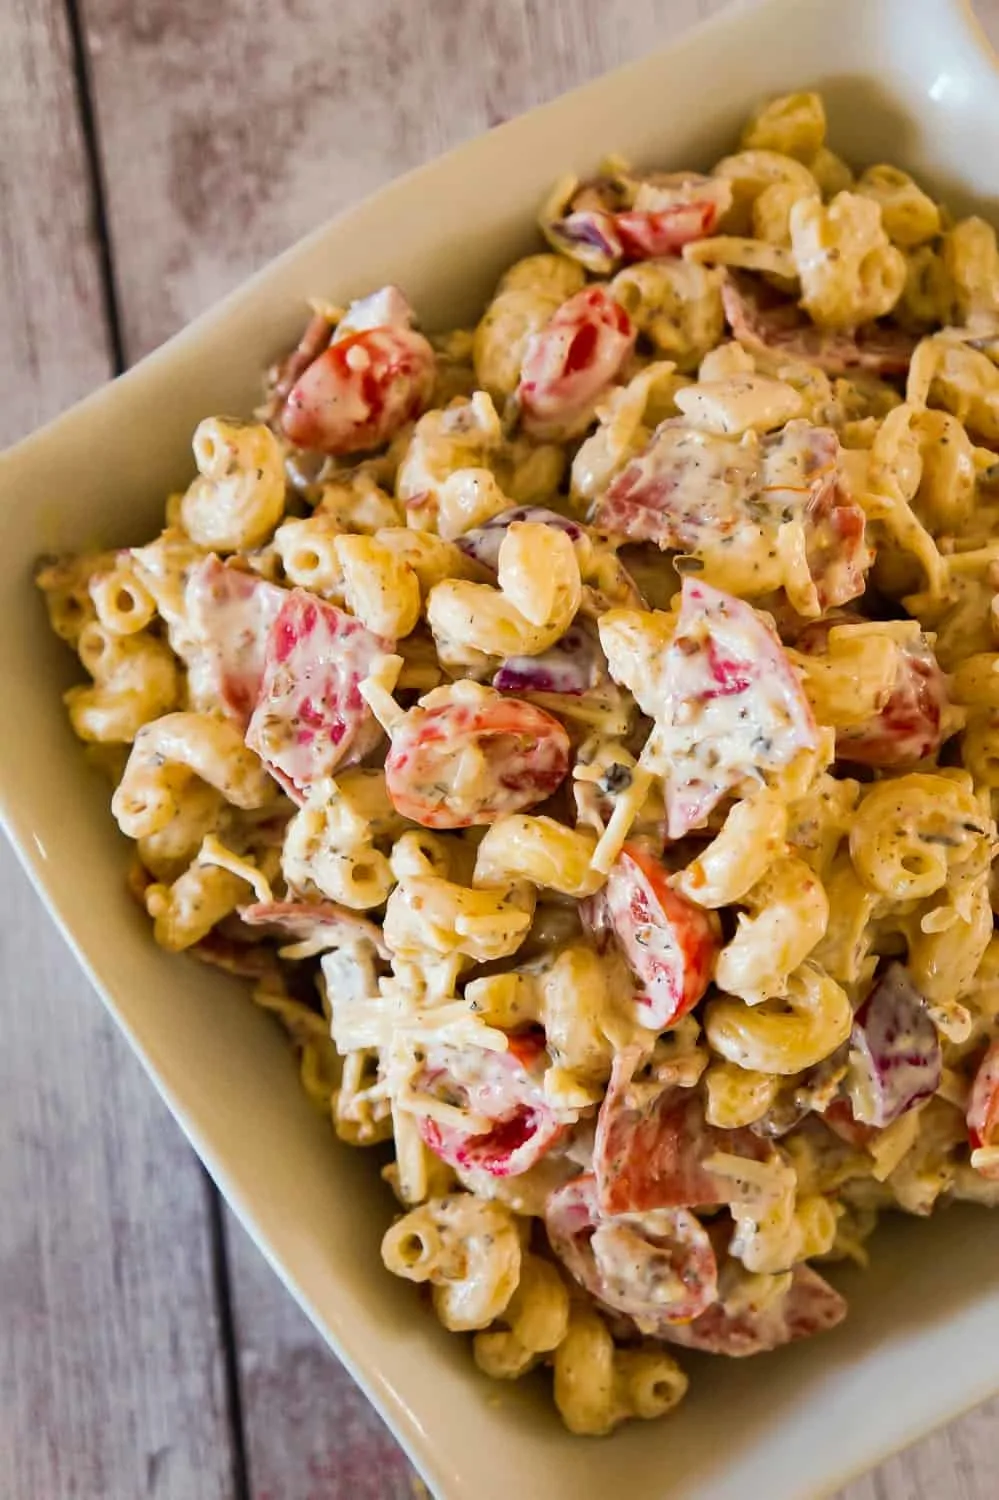 Italian Pasta Salad is a delicious cold side dish recipe perfect for potluck parties. This creamy pasta salad is loaded with cherry tomatoes, red onions, salami, bacon, basil pesto, Parmesan cheese and mozzarella cheese.